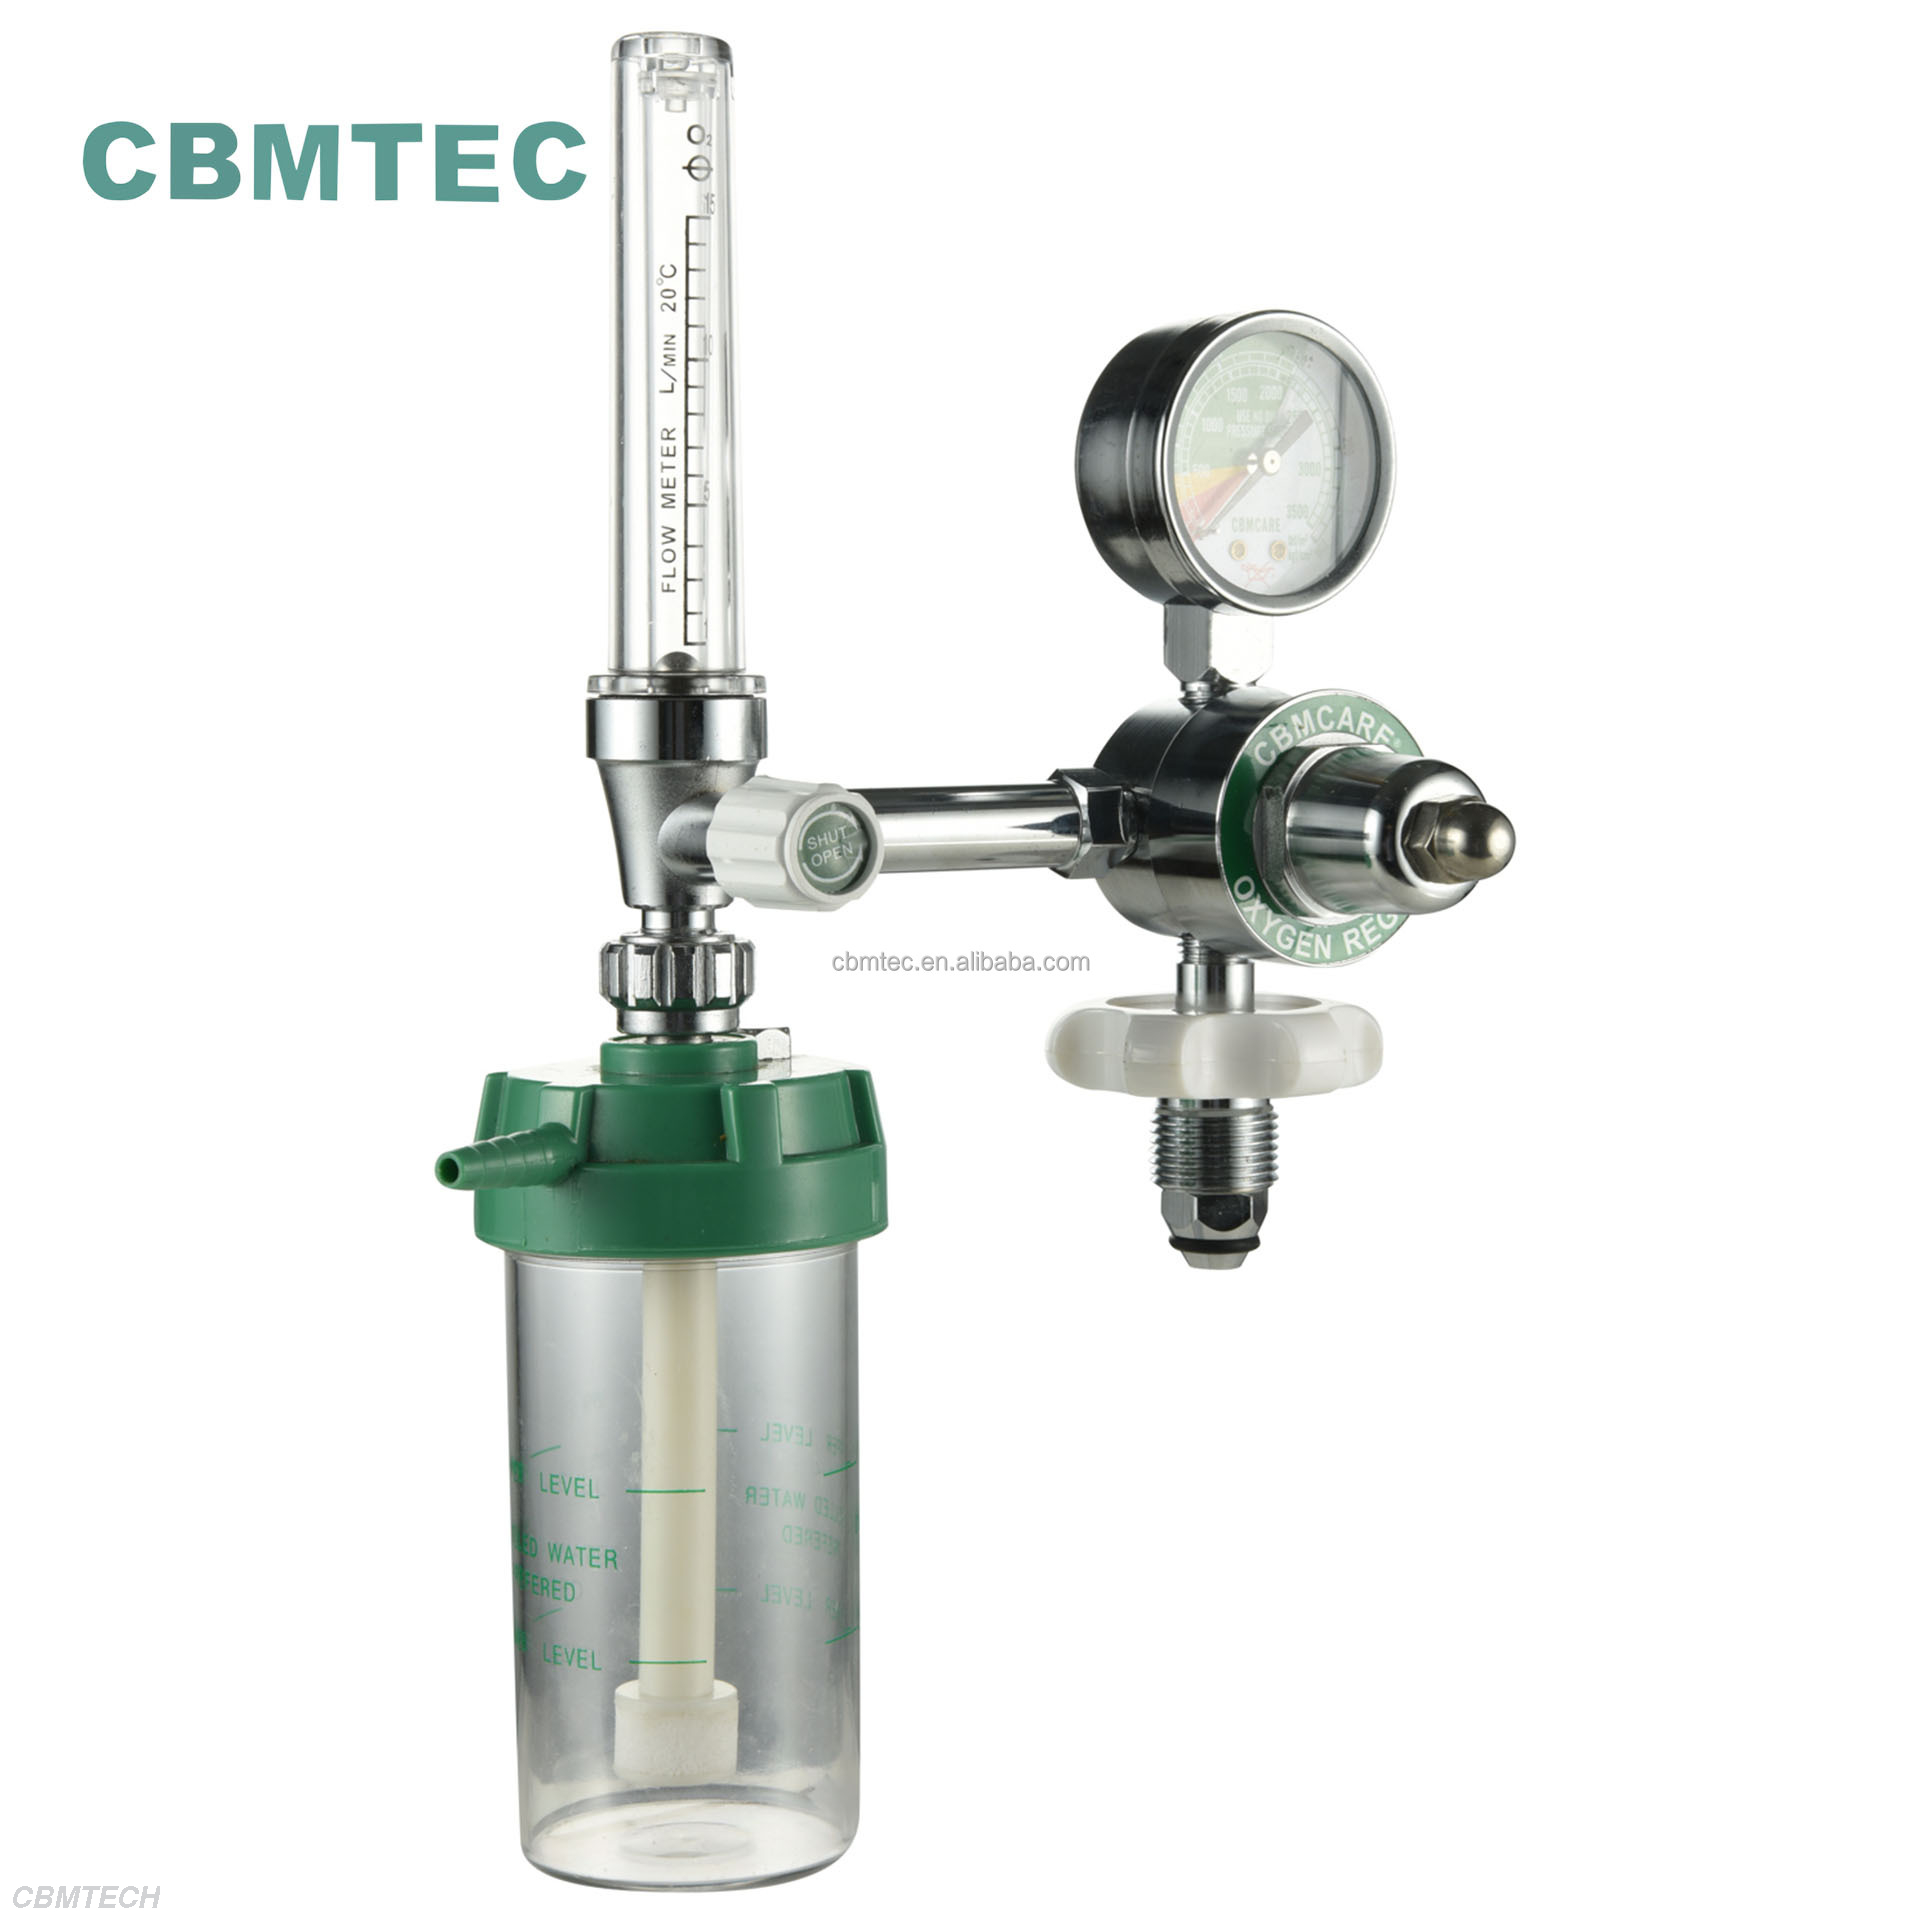 Medical Pin Index Oxygen Regulator with Humidifier